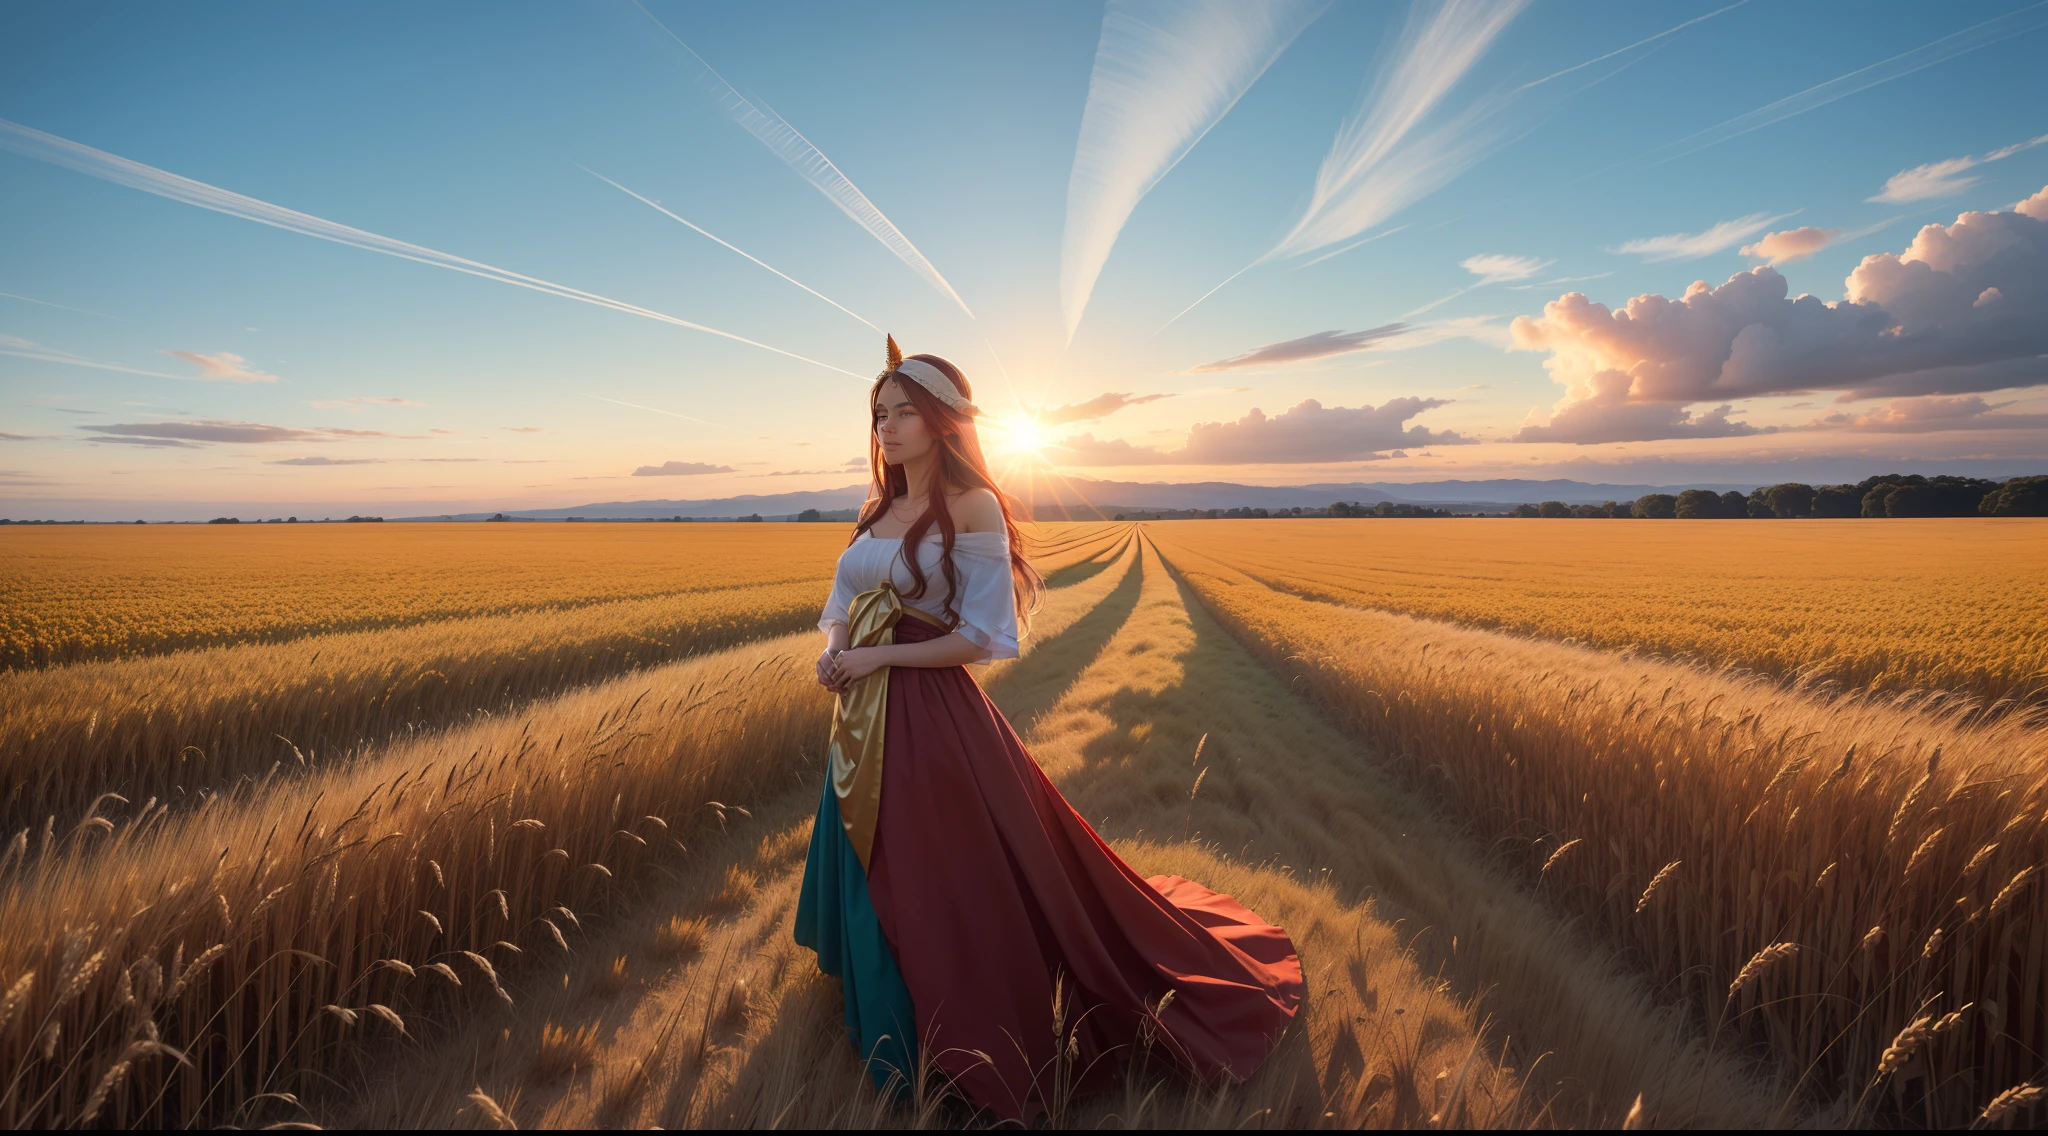 "Descreva uma imagem da deusa Ninkasi, a deusa da cerveja, vestida com um longo vestido vermelho e cabelos vermelhos, standing in front of a lush wheat field. The goddess radiates an aura of divinity and is enveloped in an atmosphere of serenity. His gaze is fixed on the wheat field, which extends as far as the eye can see, with golden ears swaying gently in the breeze. Explore os detalhes da deusa, seu vestido escarlate, her long red hair and the lush wheat plantation in the background."